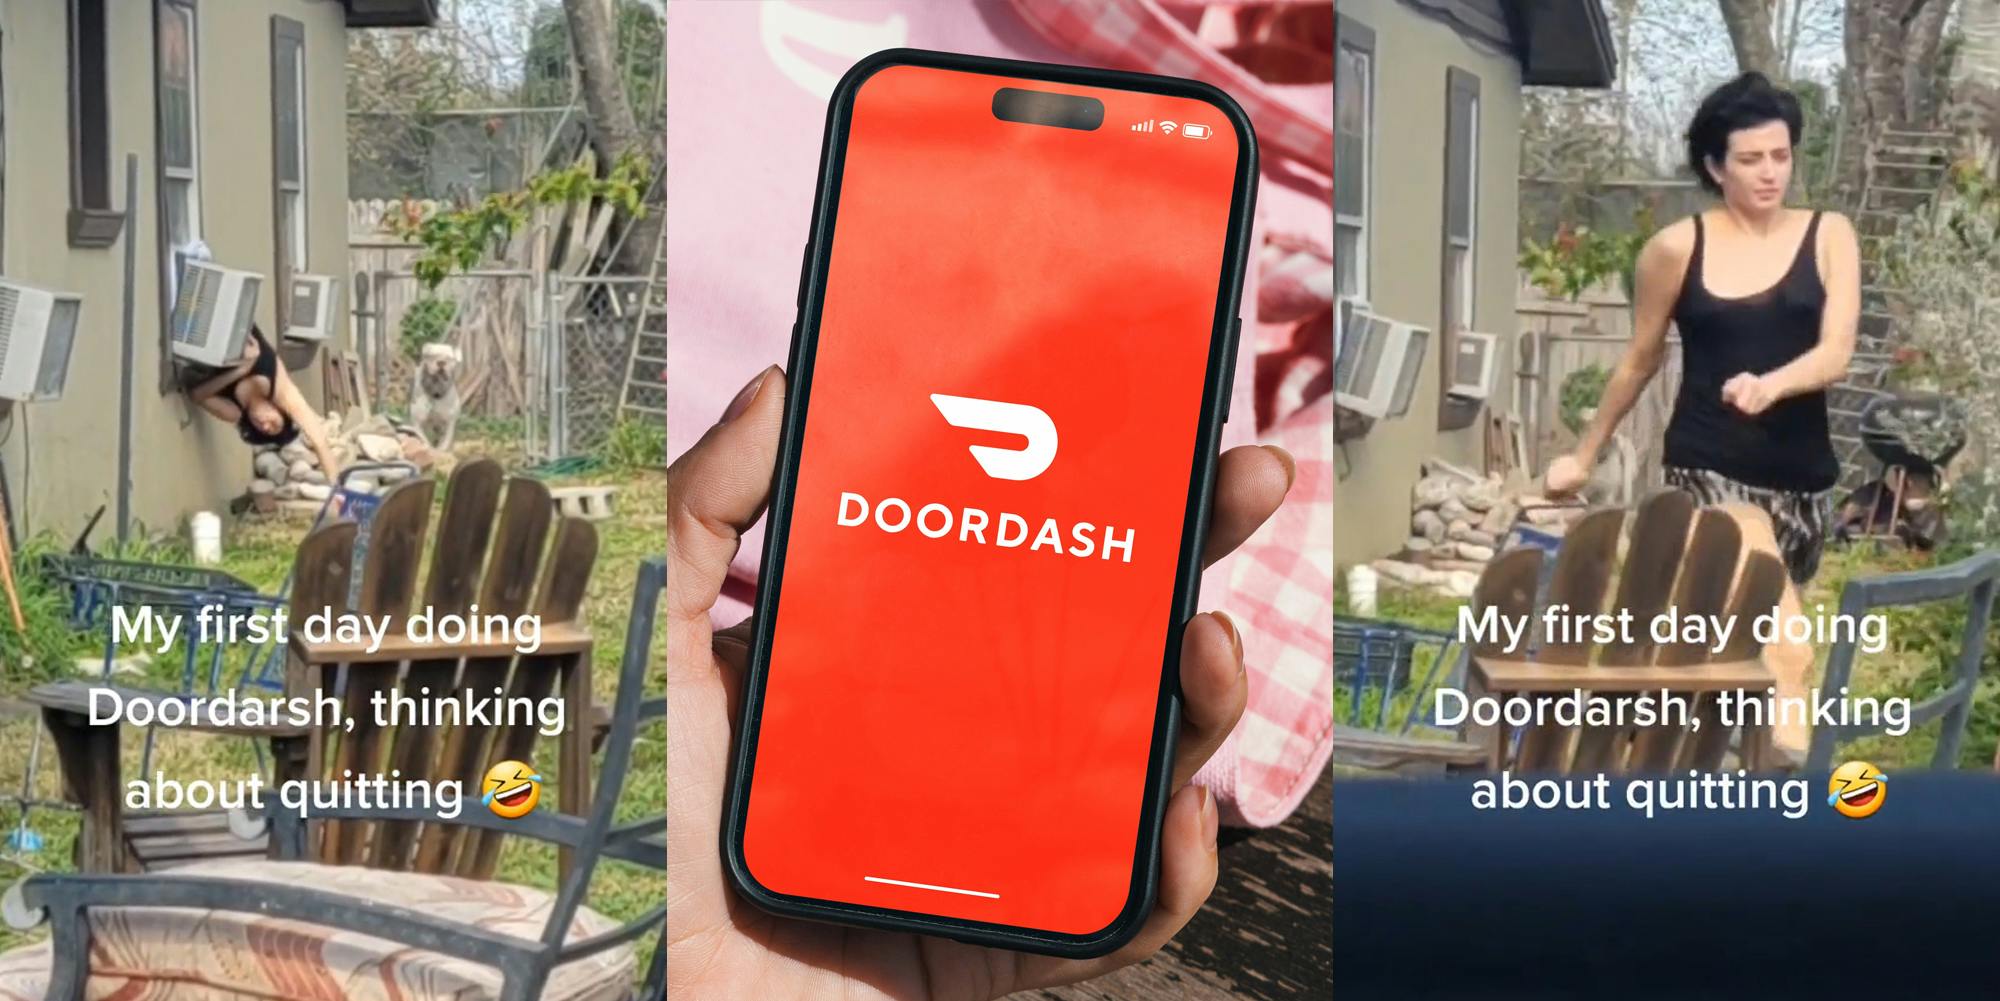 woman climbing out of window with caption "My first day doing DoorDash, thinking about quitting" (l) DoorDash on phone in hand in front of wooden table and pink shirt (c) woman running outside with caption "My first day doing DoorDash, thinking about quitting" (r)